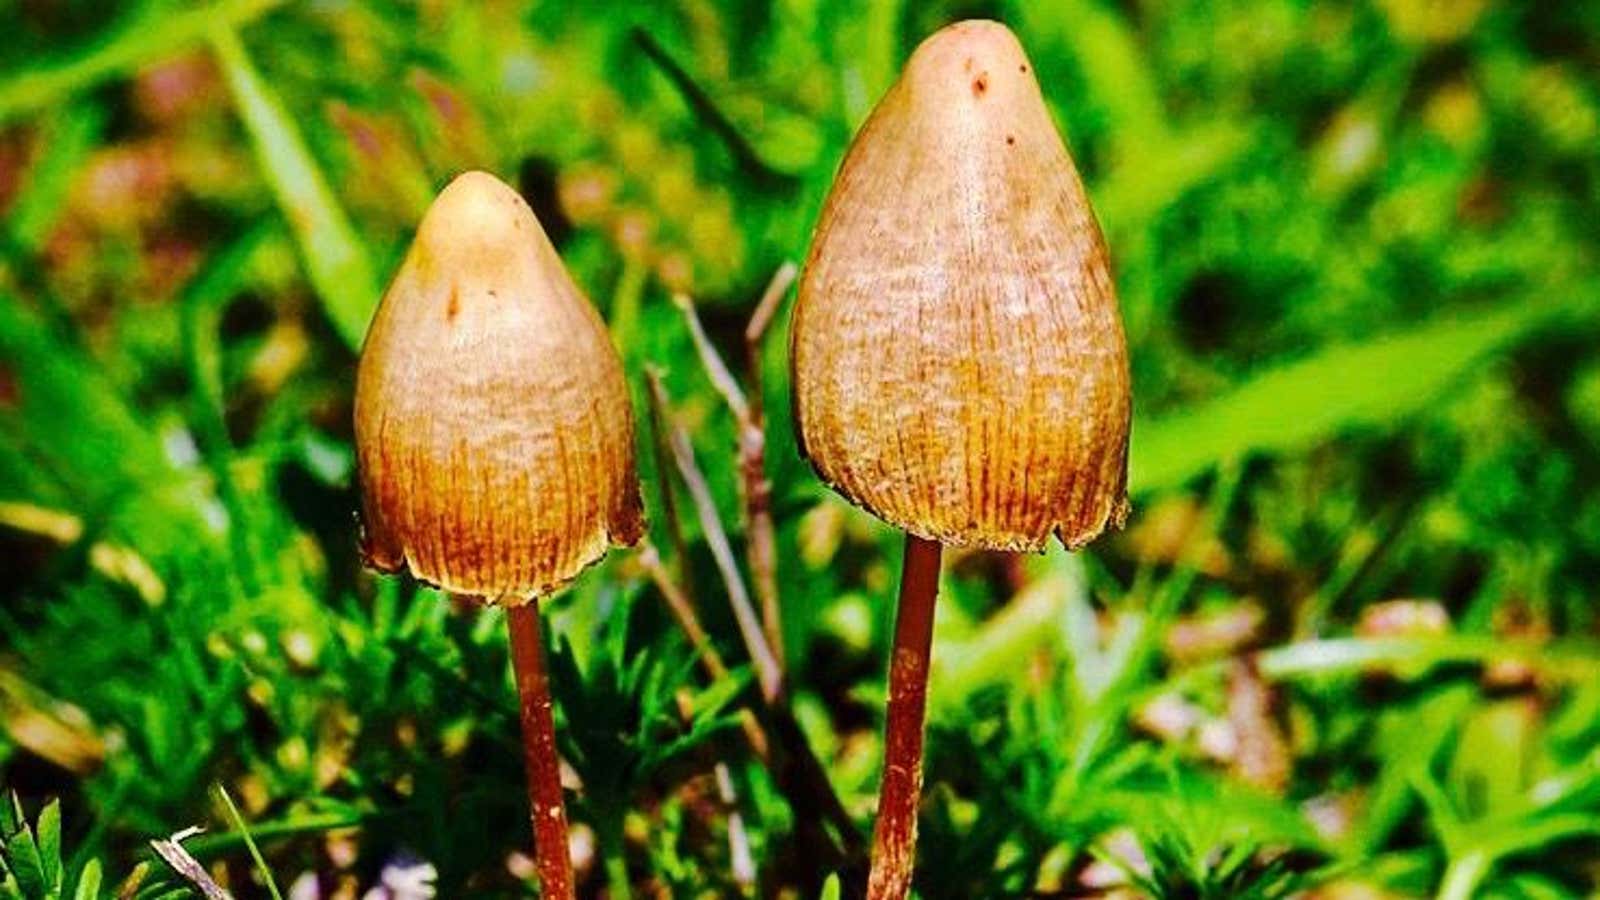 Magic mushrooms started out as a weapon against insects.